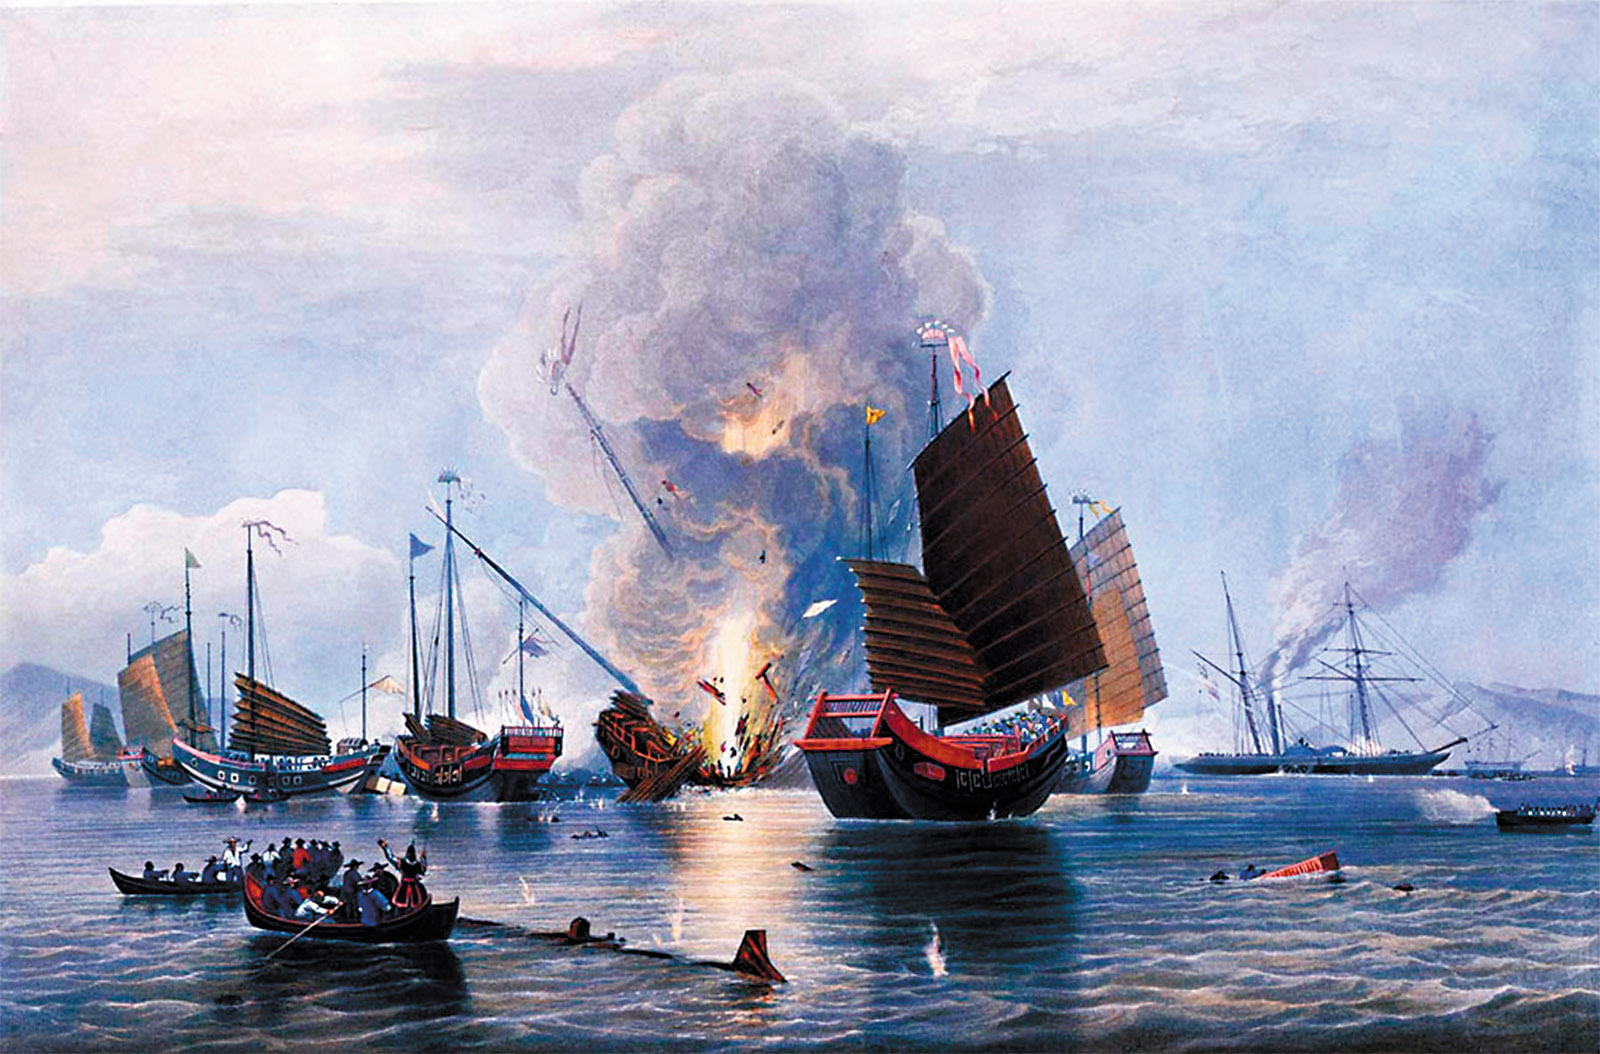 An East India Company steamship destroying Chinese war junks during the Opium War, 1841